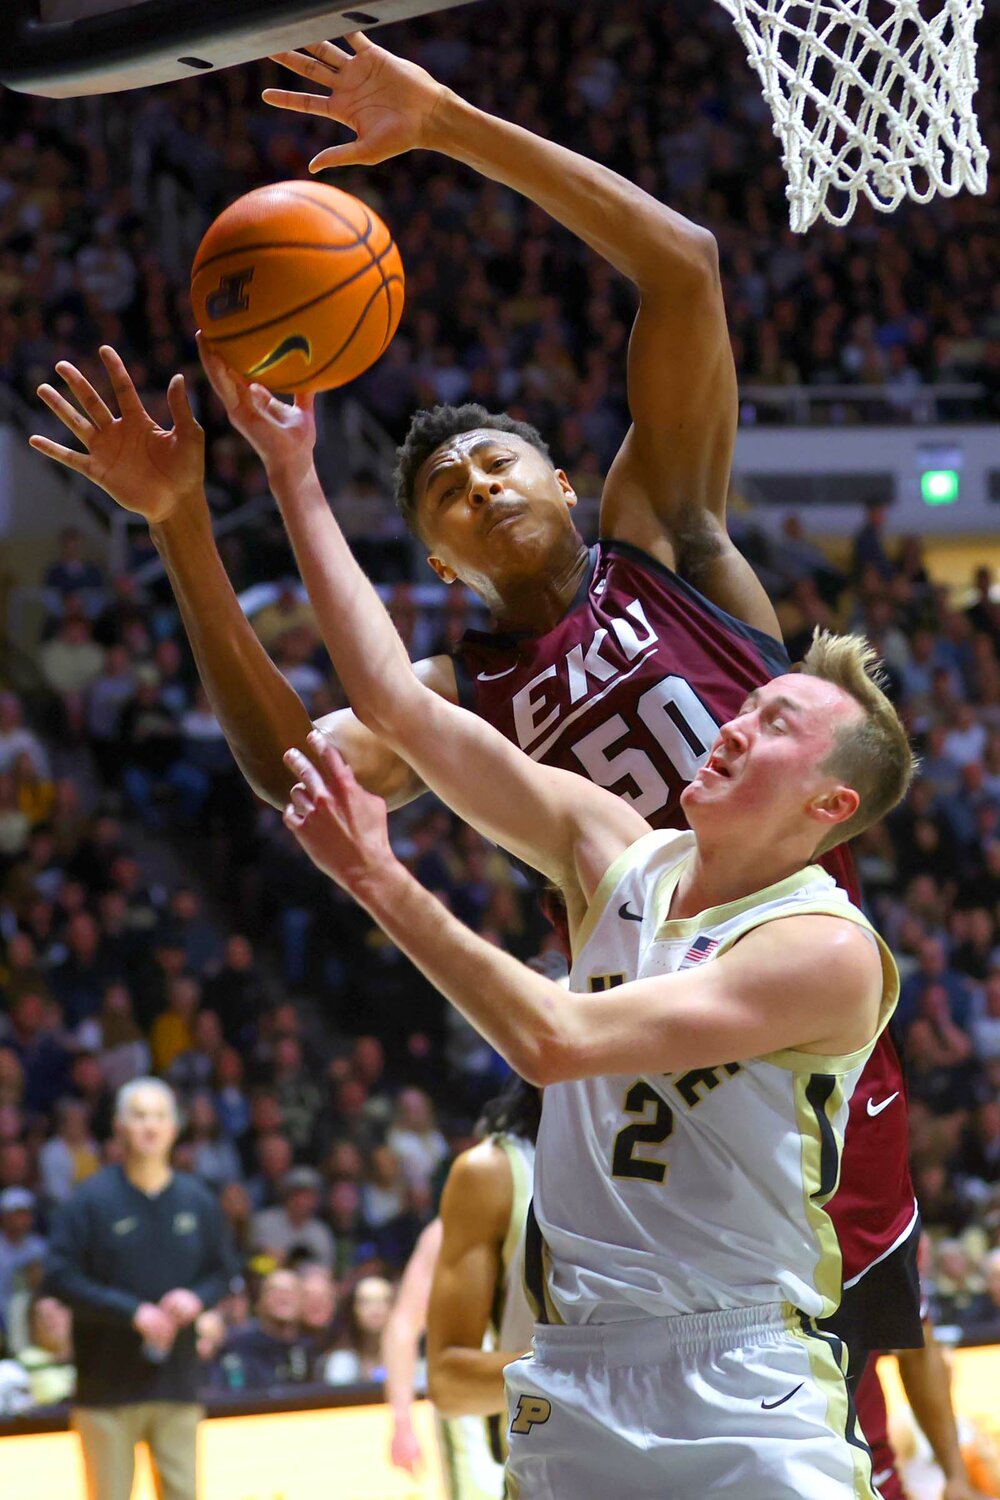 Fletcher Loyer of Purdue - going up for lay-up against Isaiah Cozart of Eastern Kentucky